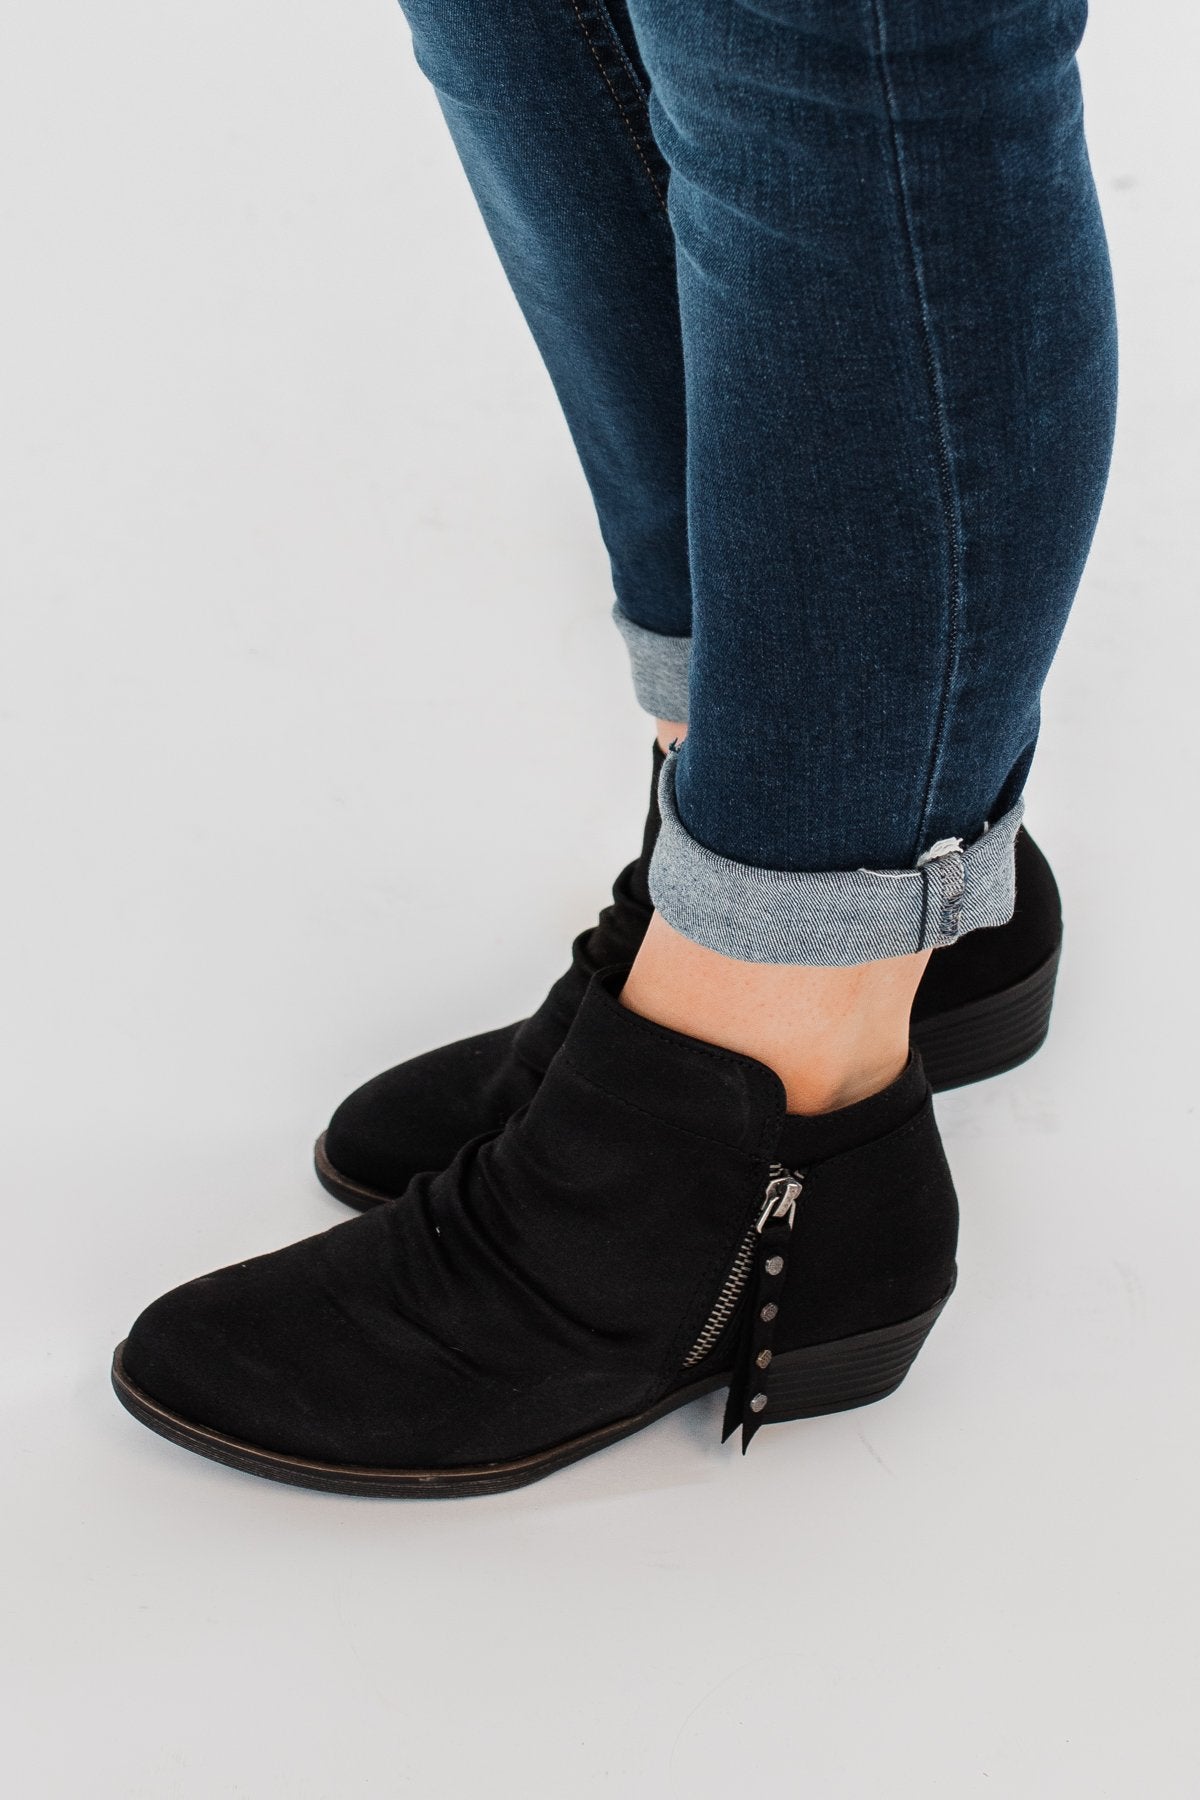 Rampage Wallace Booties- Black – The 